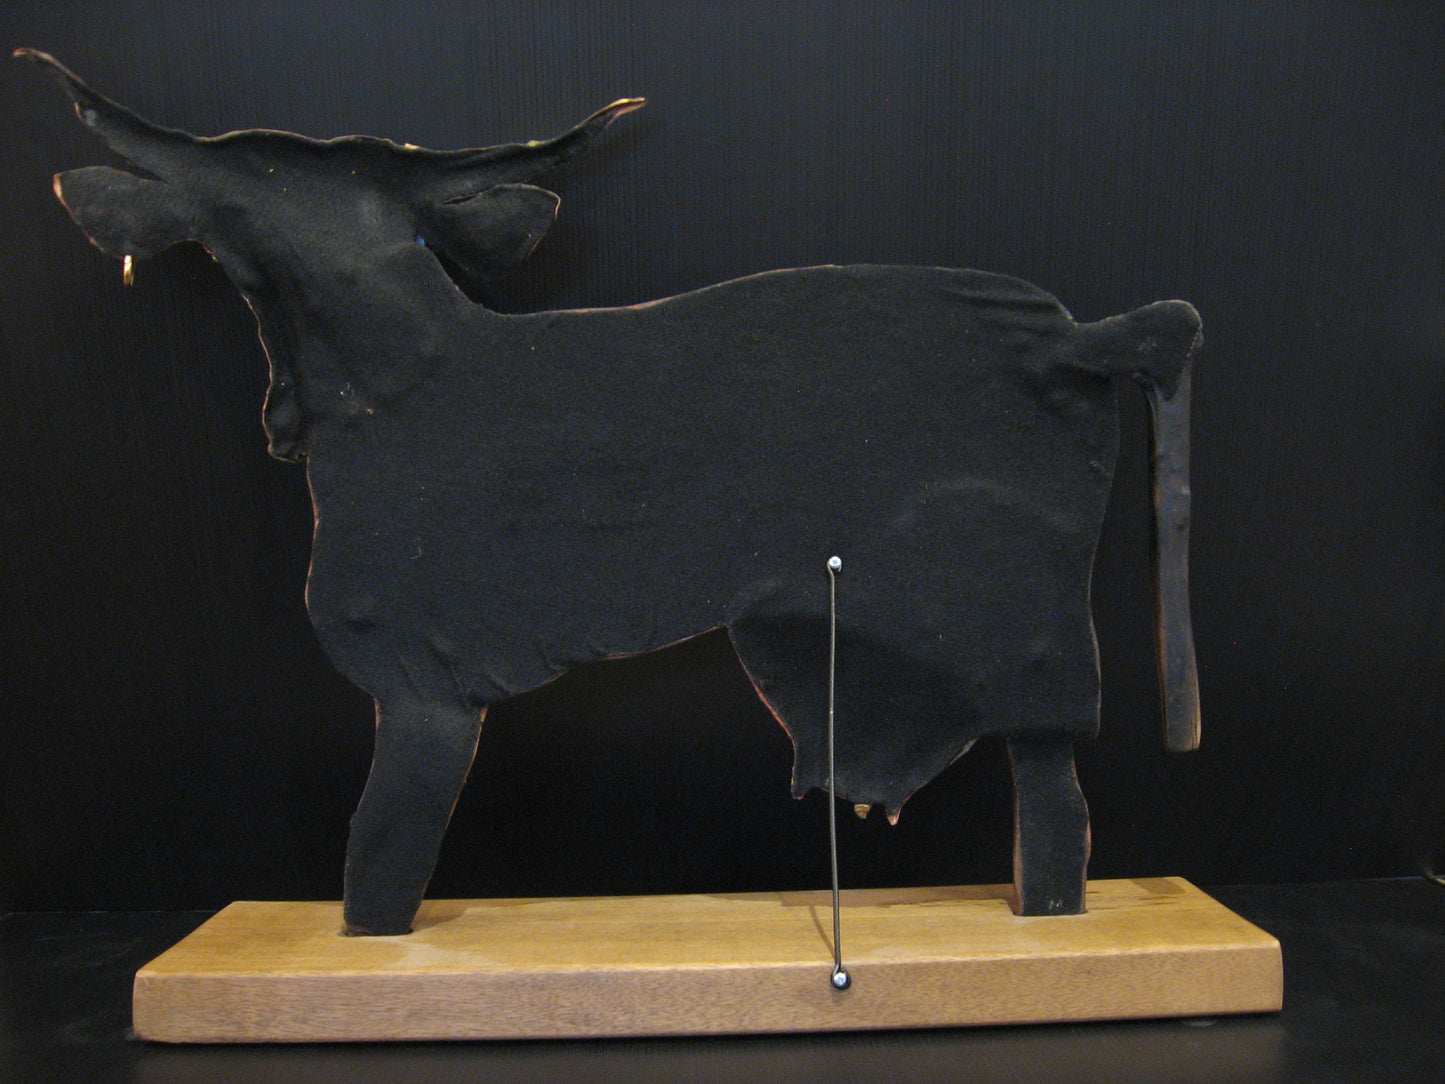 Reverse side of Cow Sculpture Art of Metal and Wood by Serge Souslov Silver Fern Gallery